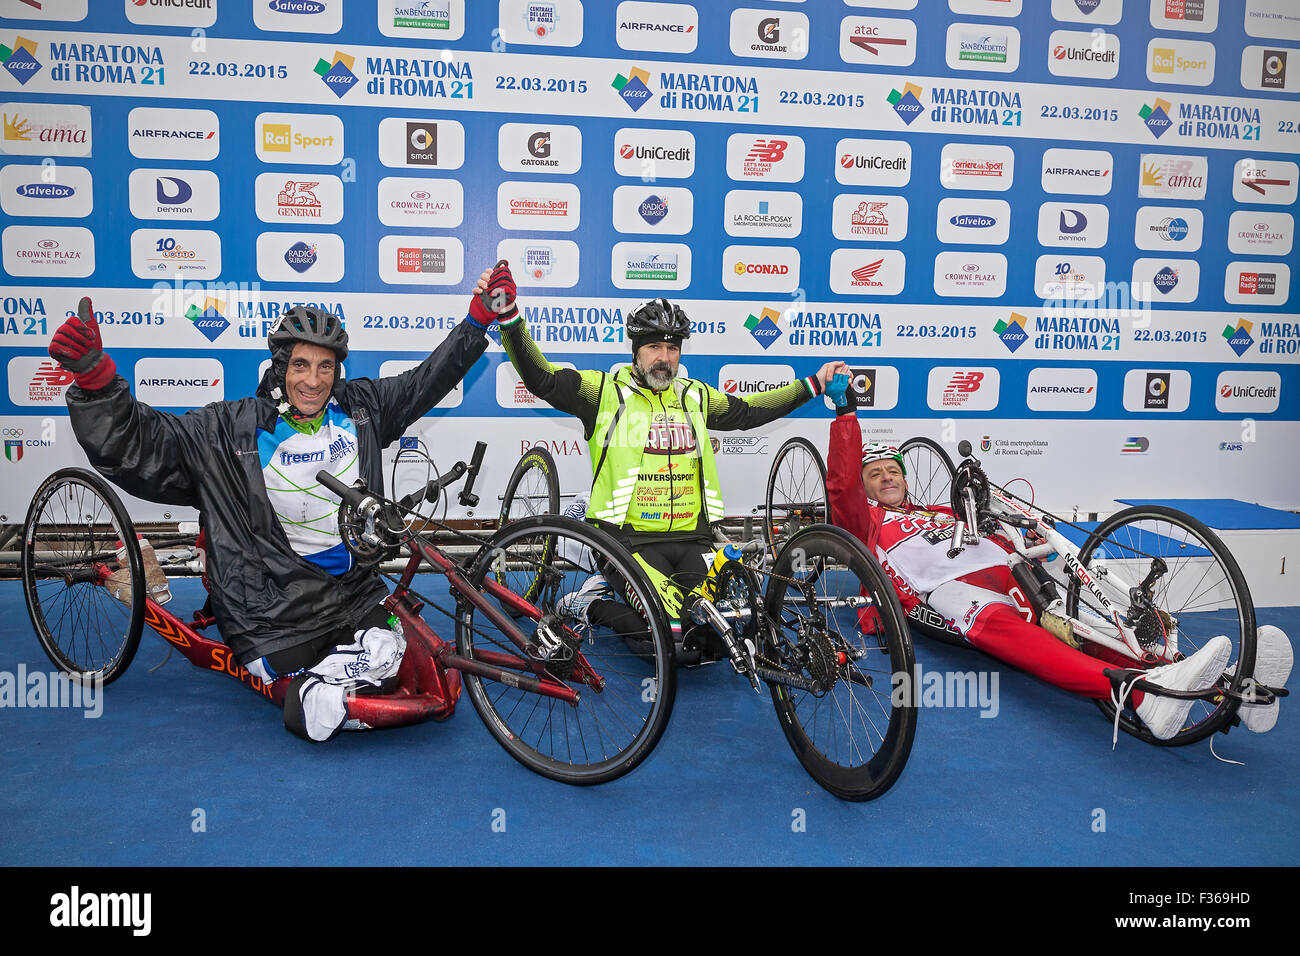 Rome, Italy - March 22, 2015: 21th Rome Marathon. Winner of the race handbike Fabrizio Caselli (center), with (to his right) runner Fabrizio Bove, and (to his left) Gian Luca Laghi. Stock Photo